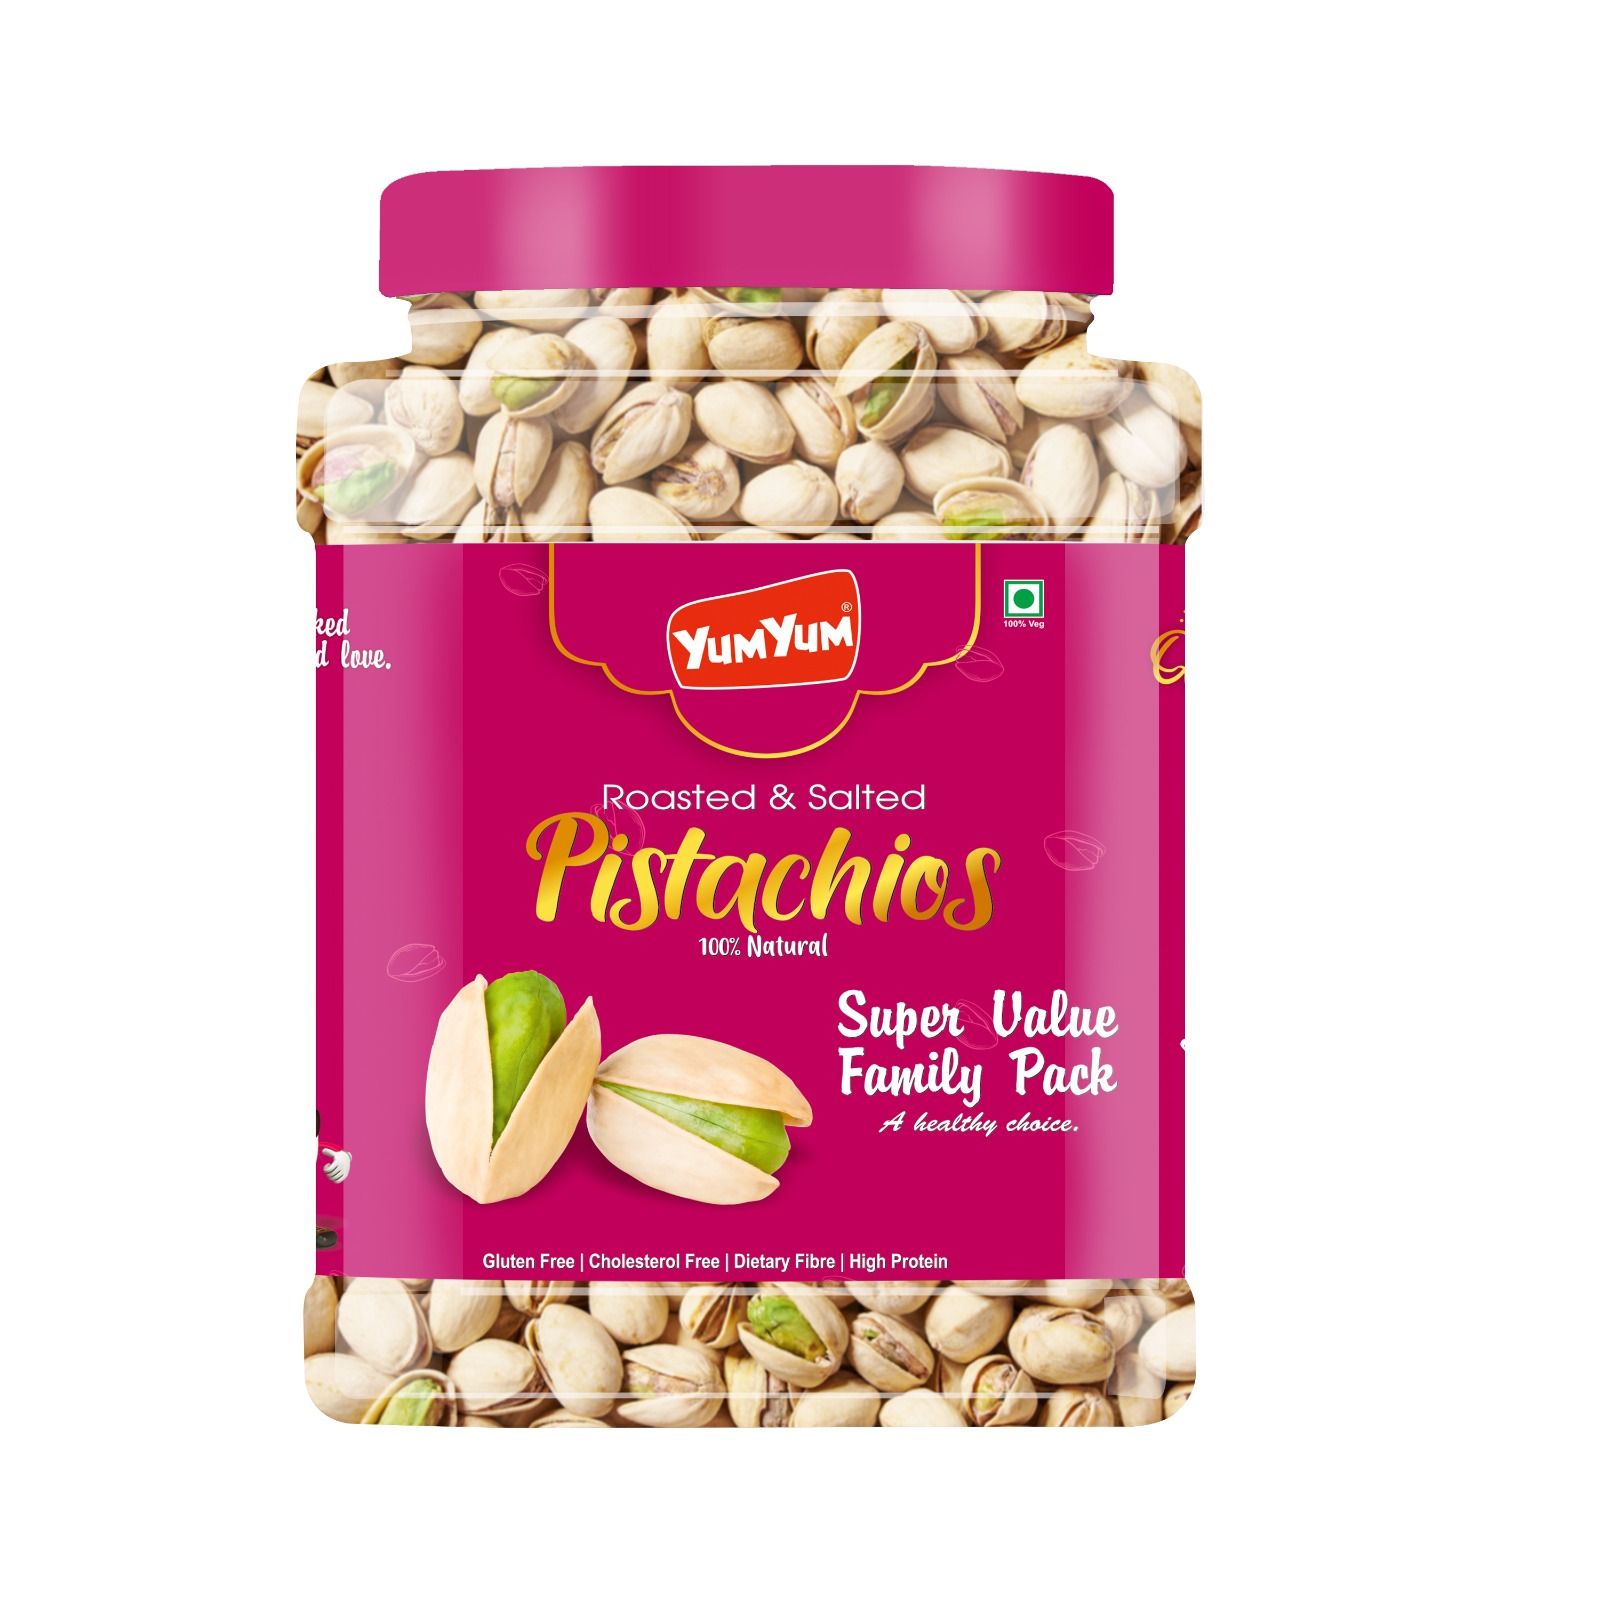 Yum Yum Roasted & Salted Pistachios 1kg